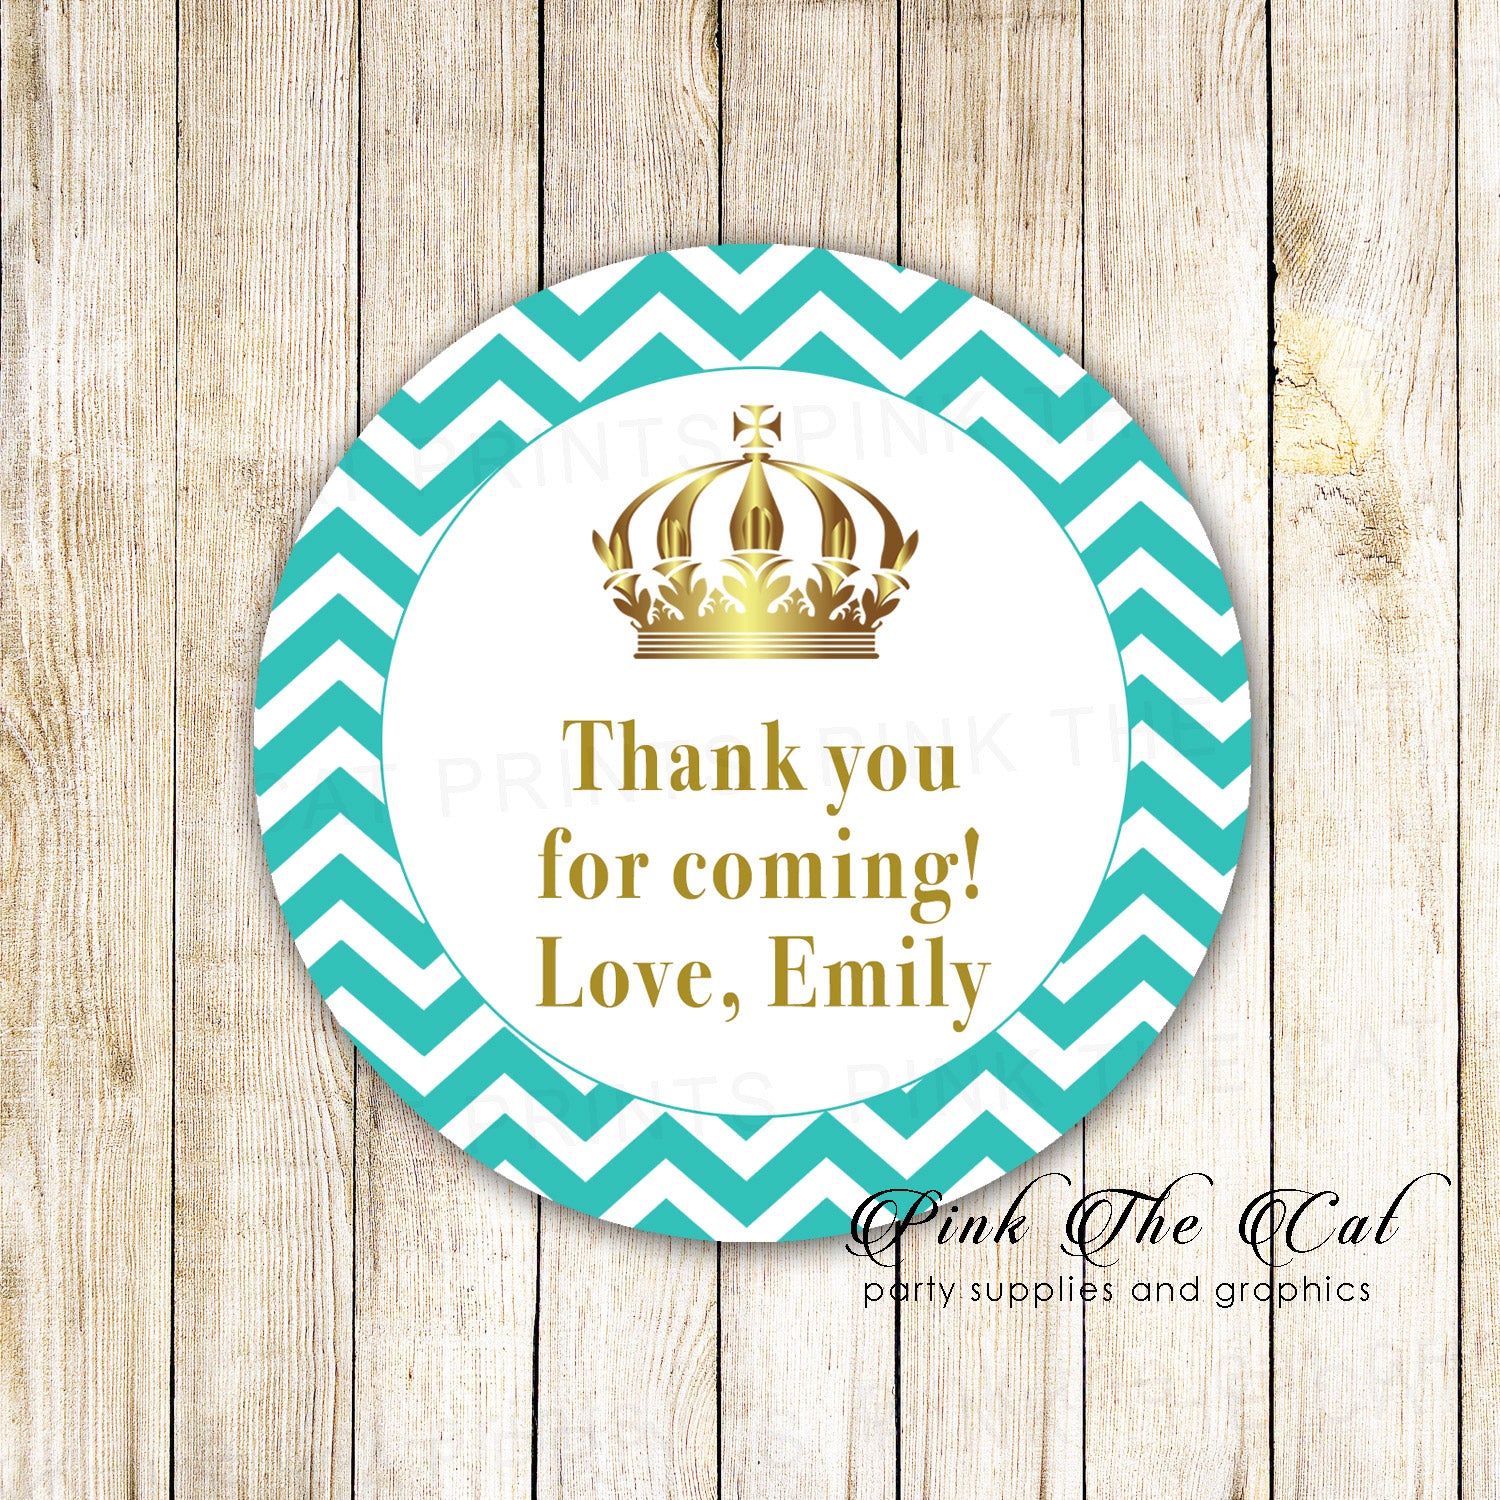 40 stickers princess teal 2'' personalized birthday baby shower favors